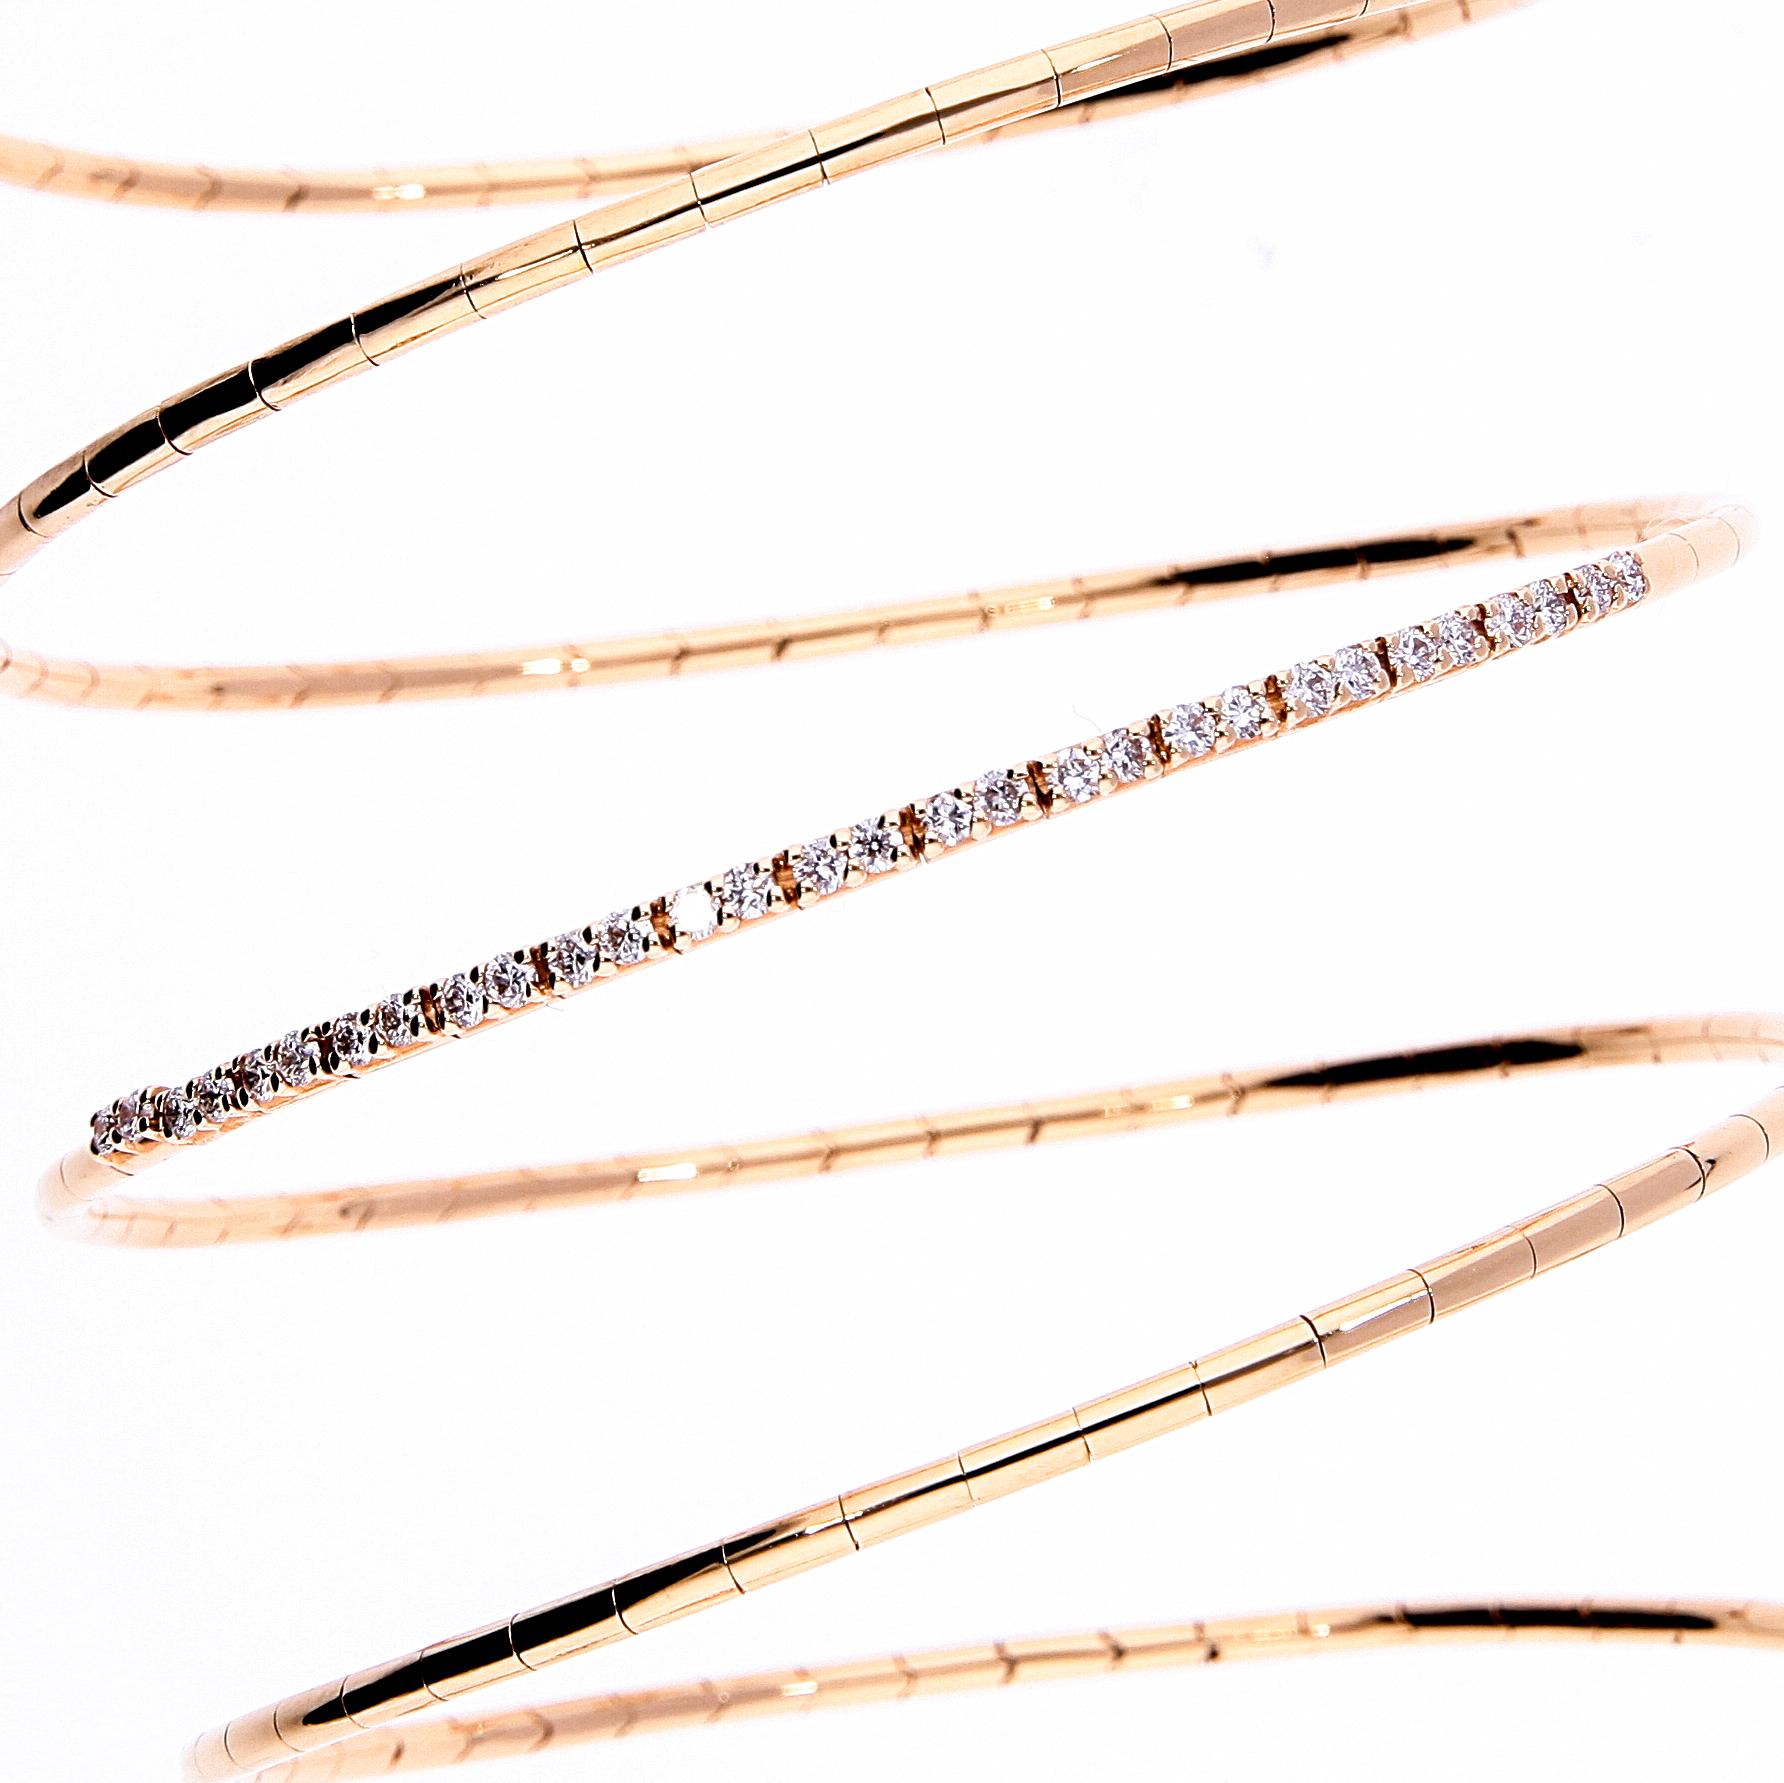 0.54 ct of Diamonds on 18 Kt Rose Gold Elastic Spiral Bracelet Made in Italy For Sale 7